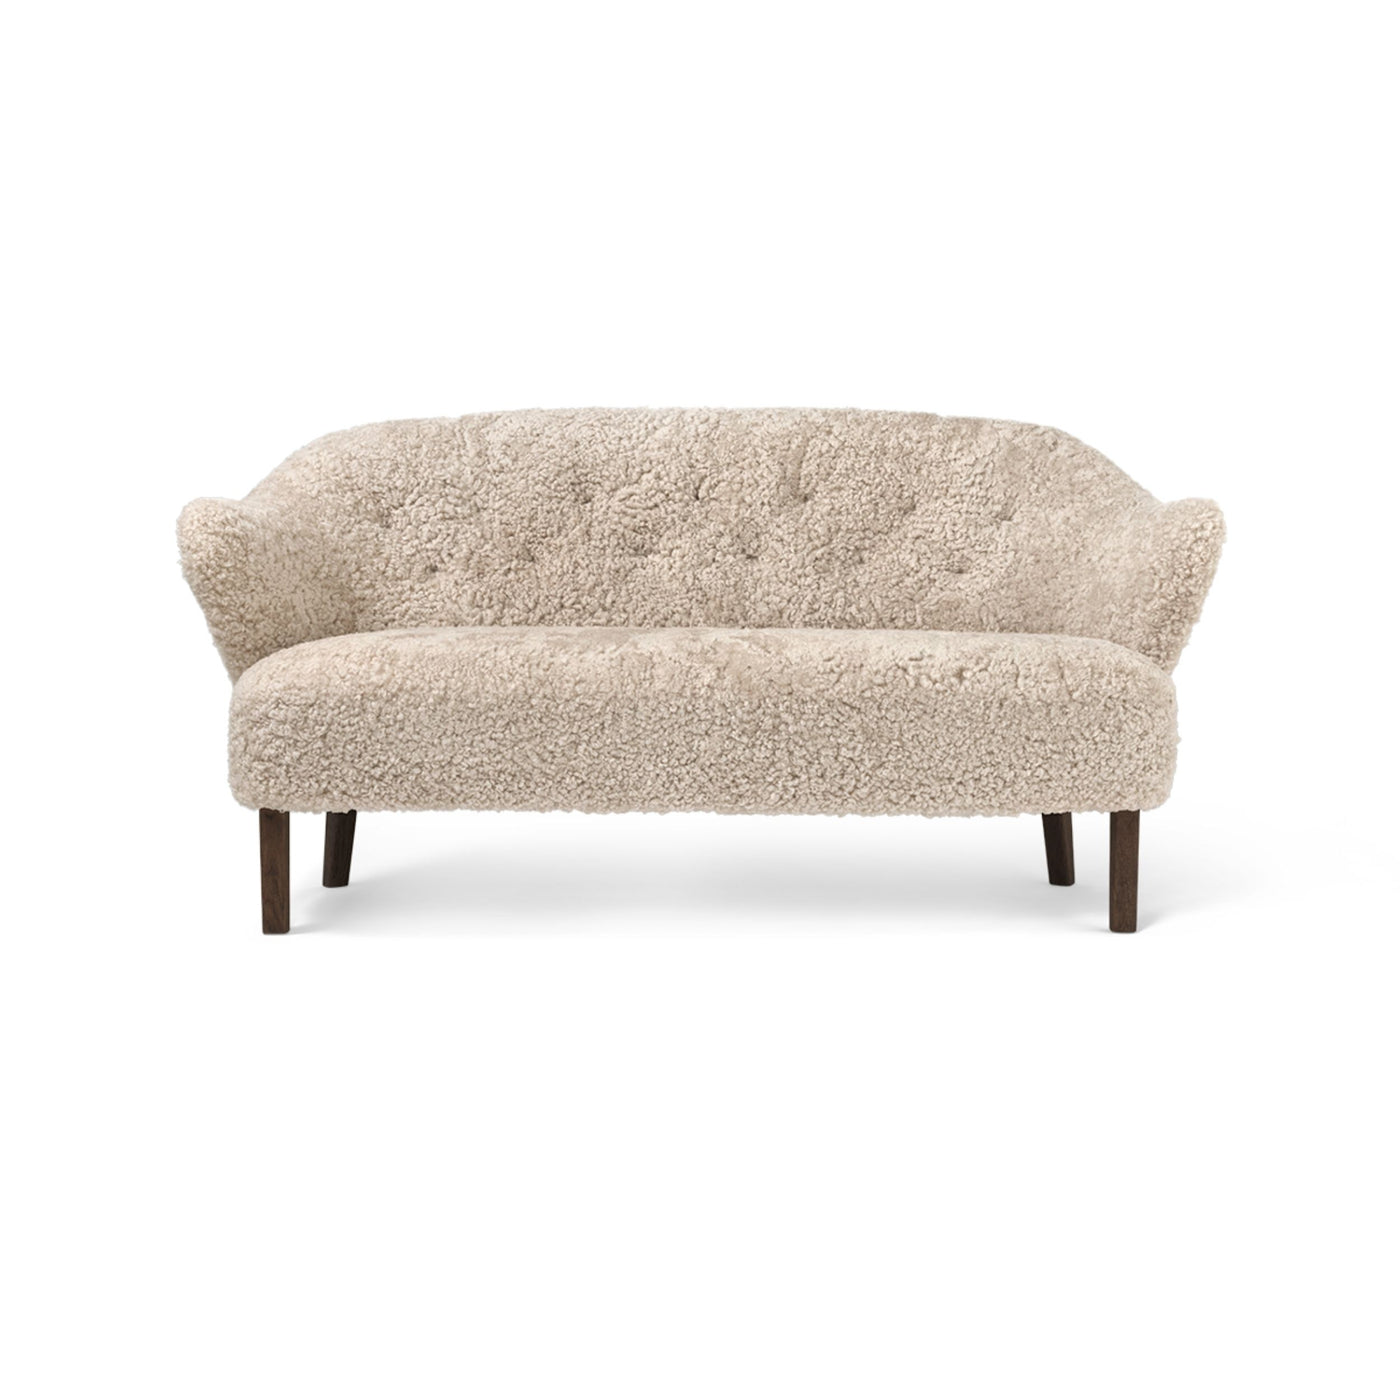 By Lassen Ingeborg sofa with smoked oak legs. Made to order from someday designs. #colour_sheepskin-moonlight